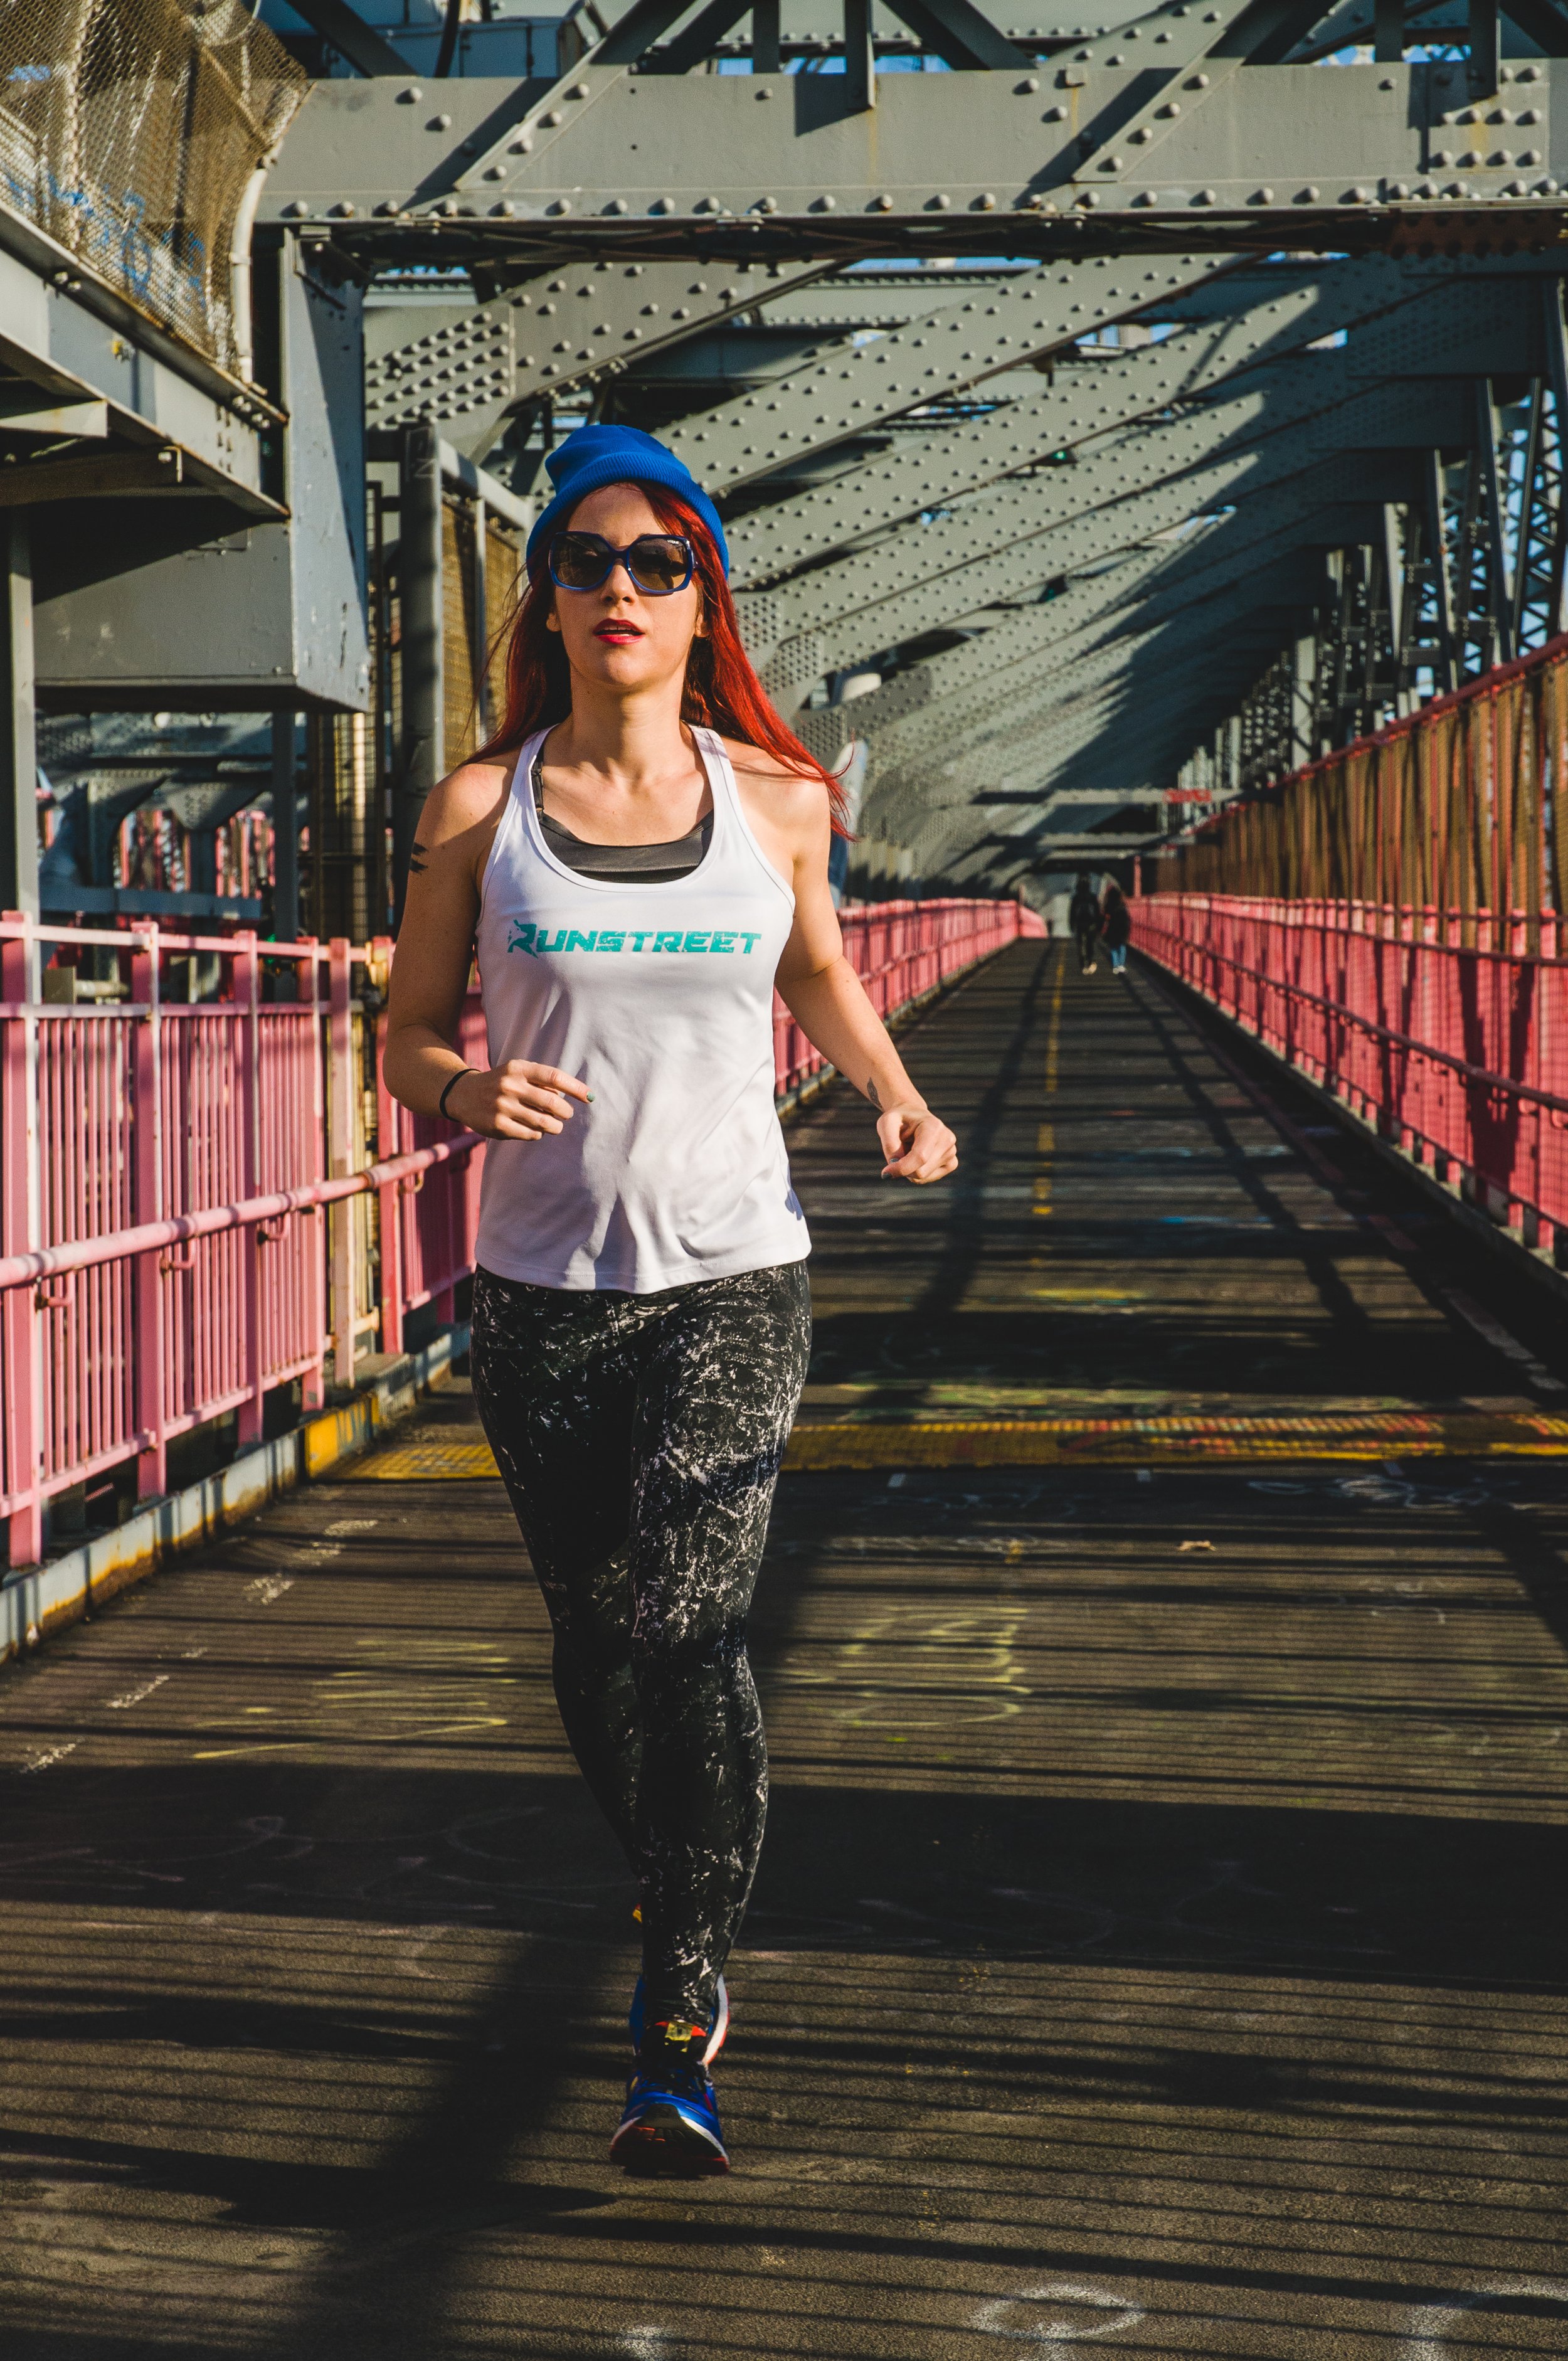 7 of the best running workouts to build endurance, strength and speed - Run  With Caroline